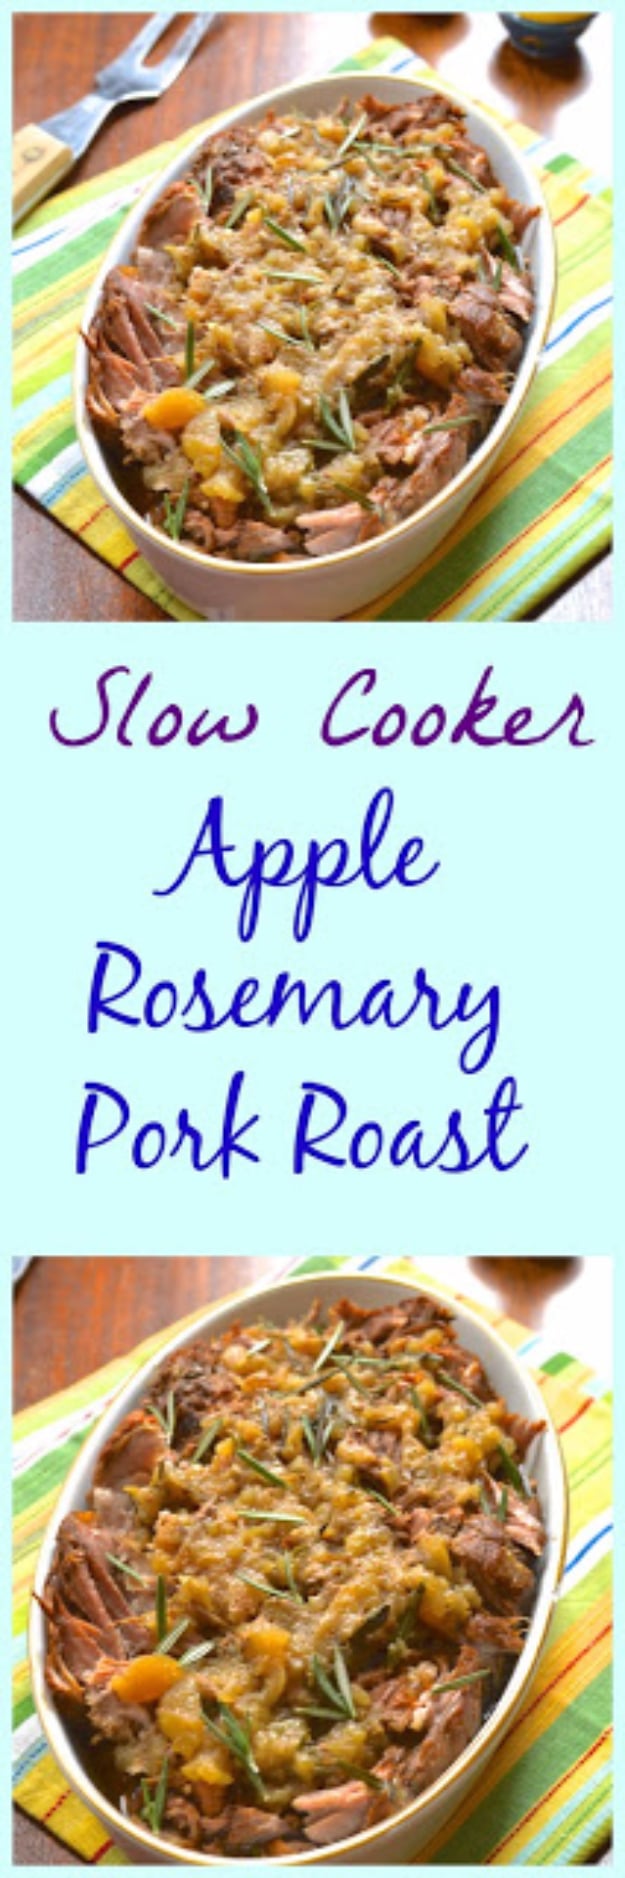 Thanksgiving Recipes You Can Make In A Crockpot or Slow Cooker - Slow Cooker Apple Rosemary Pork Roast - Soups, Stews, Desserts, Dips, Sides and Vegetable Recipe Ideas for Your Crock Pot #thanksgiving #recipes